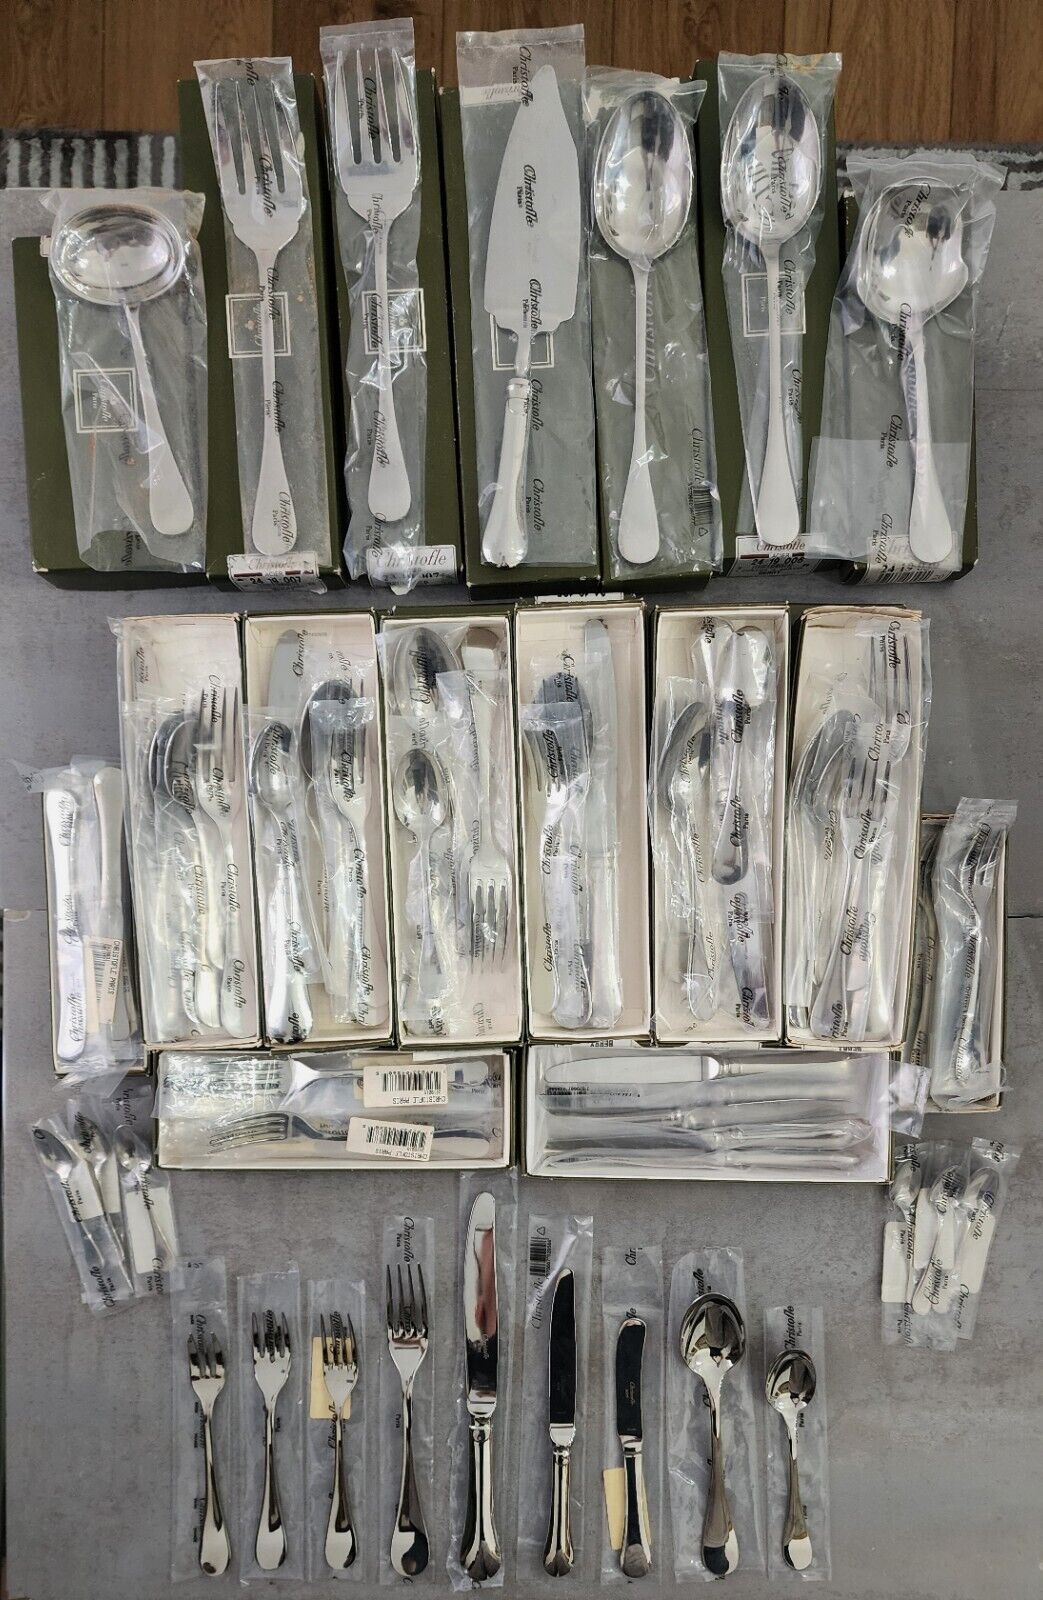 NEW OLD 117pc SET:CHRISTOFLE BERRY STAINLESS STEEL FLATWARE 12PLACE/9pc* + 7SRVS